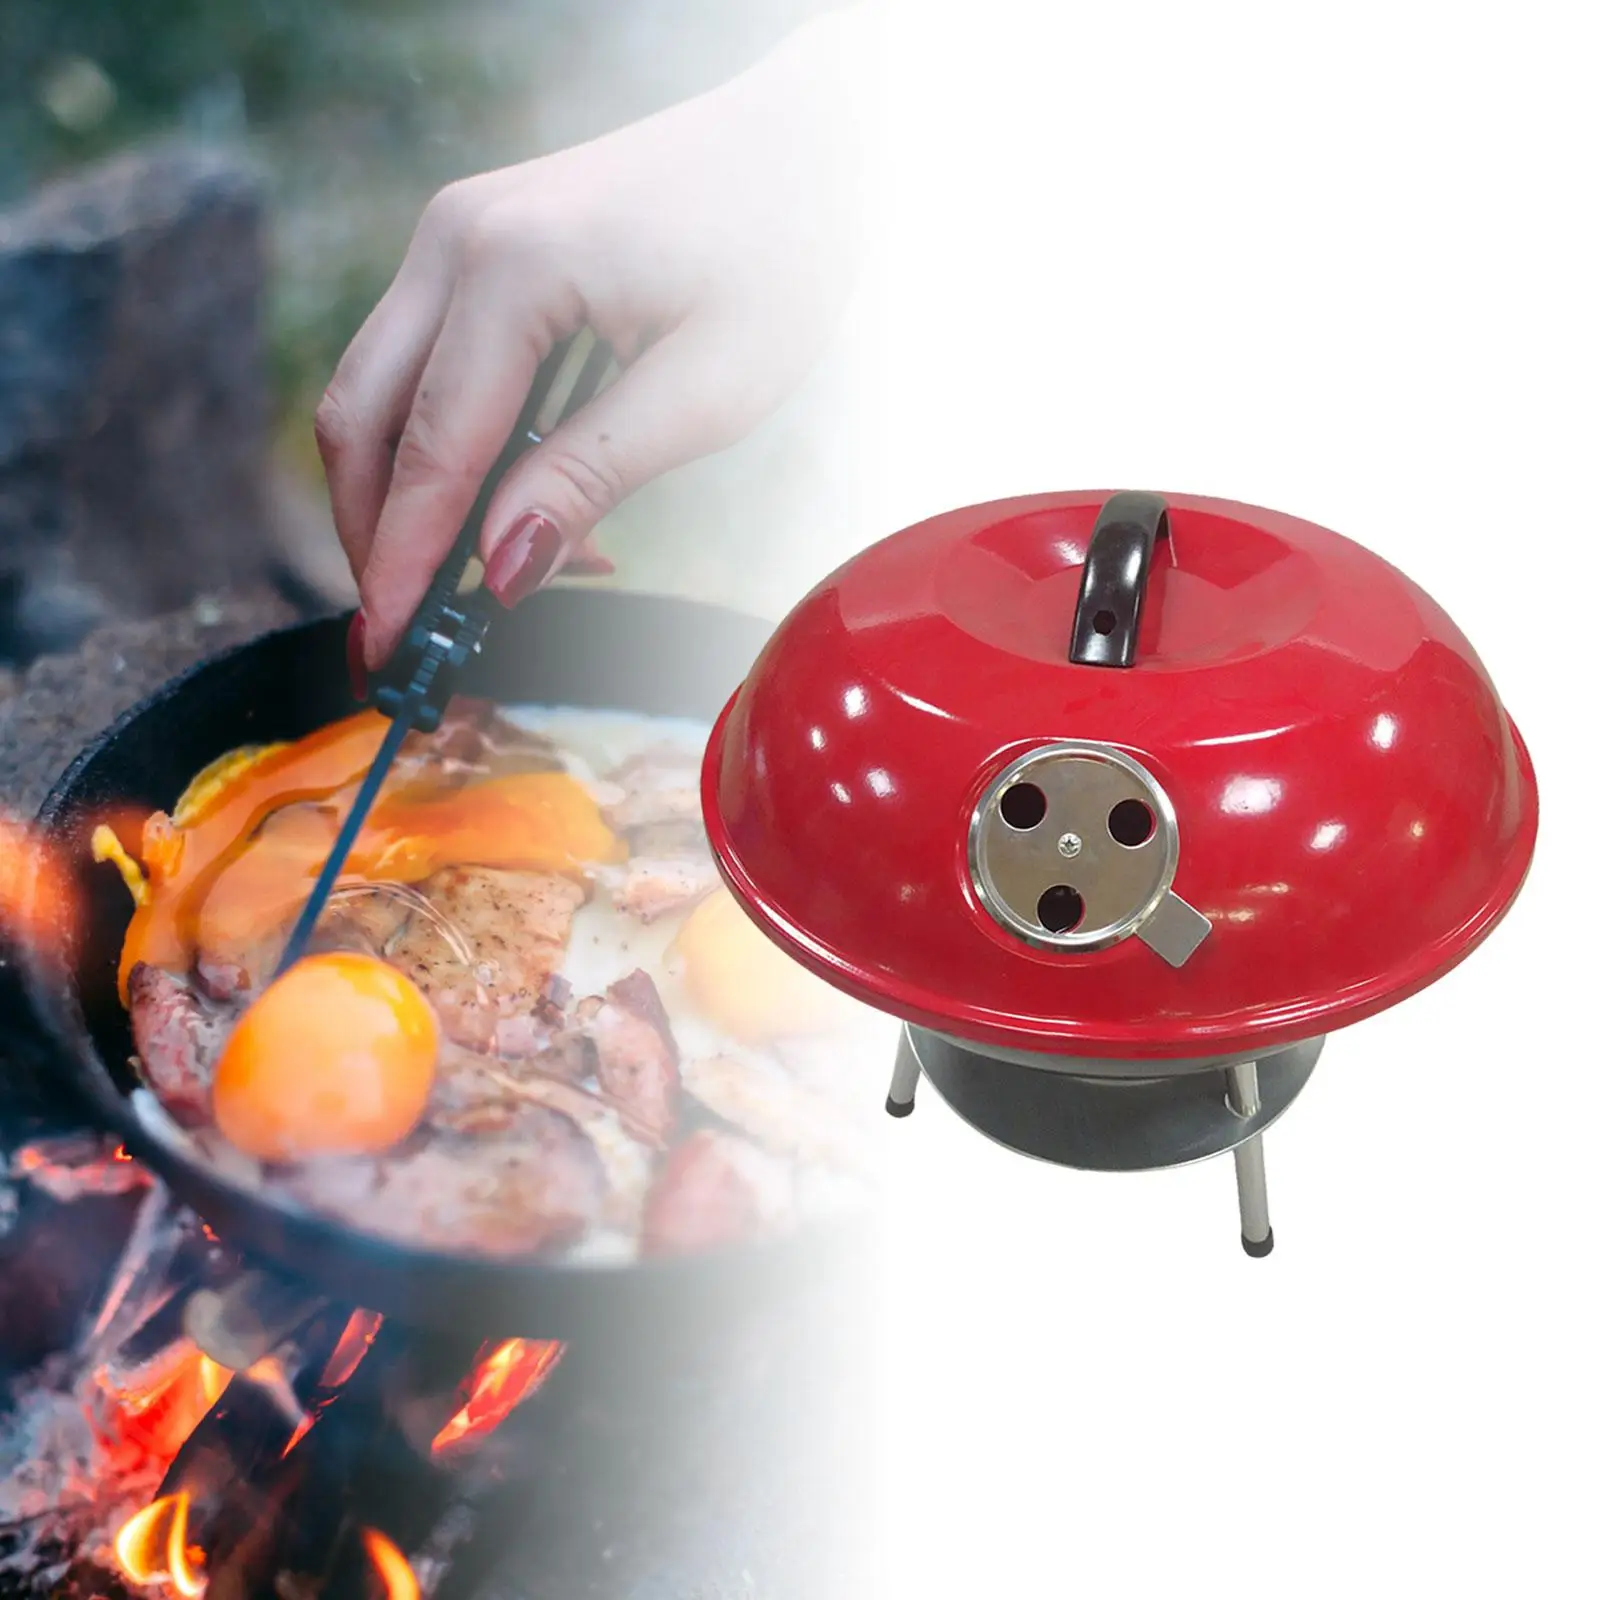 BBQ Grill Apple Shape Charcoal Stove for Outdoor Grilling Cooking Backyard